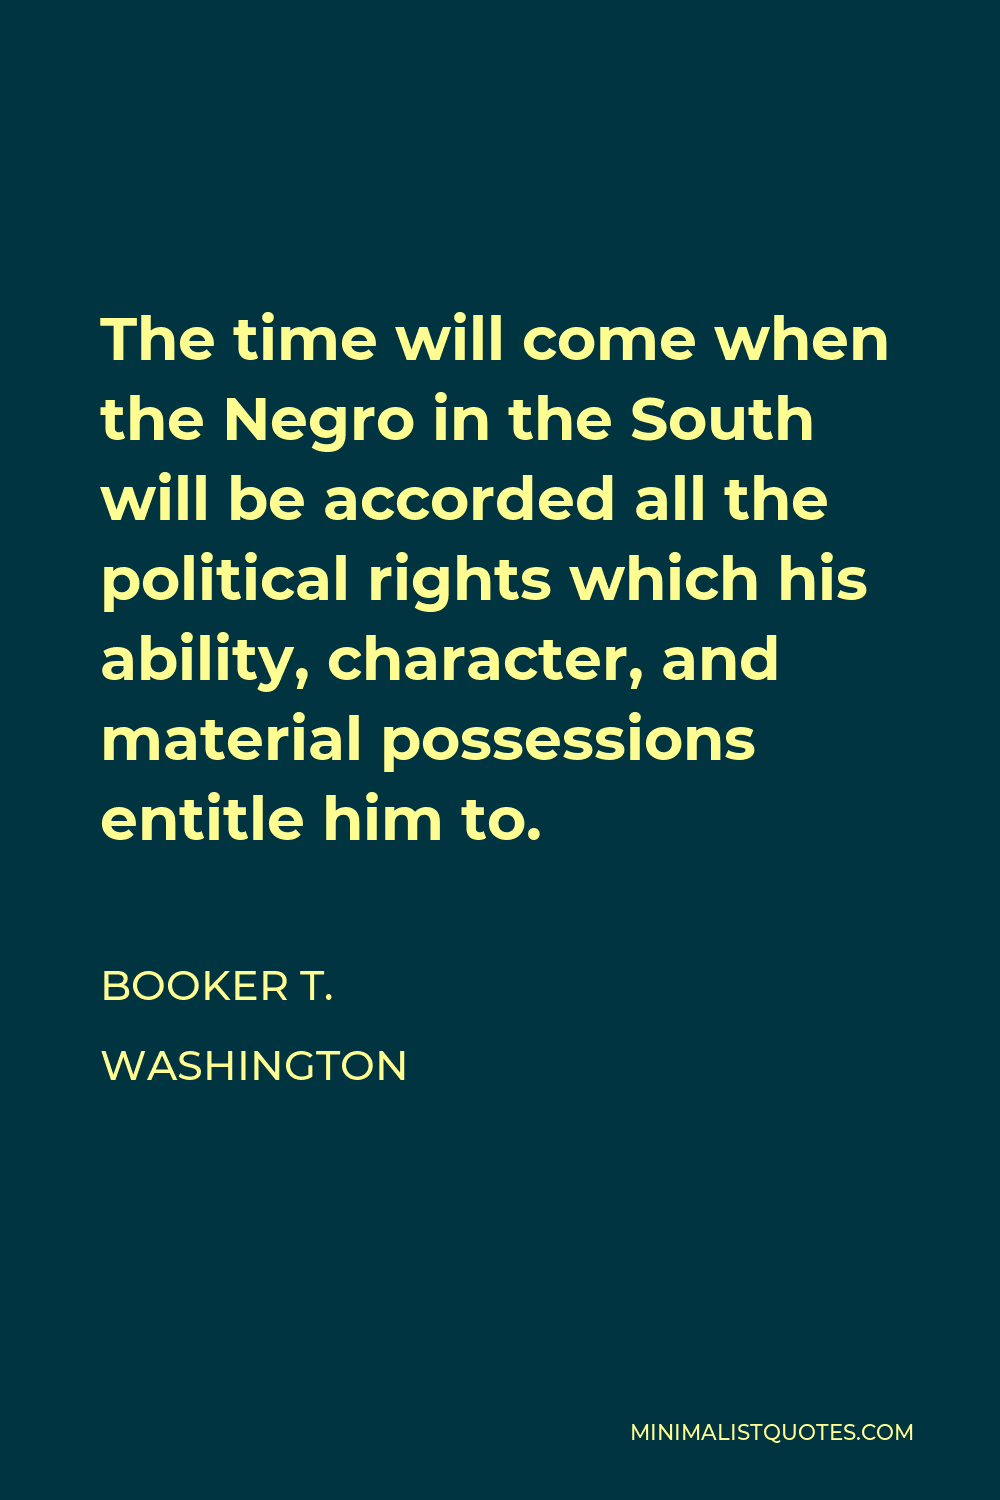 Booker T. Washington Quote - The time will come when the Negro in the South will be accorded all the political rights which his ability, character, and material possessions entitle him to.